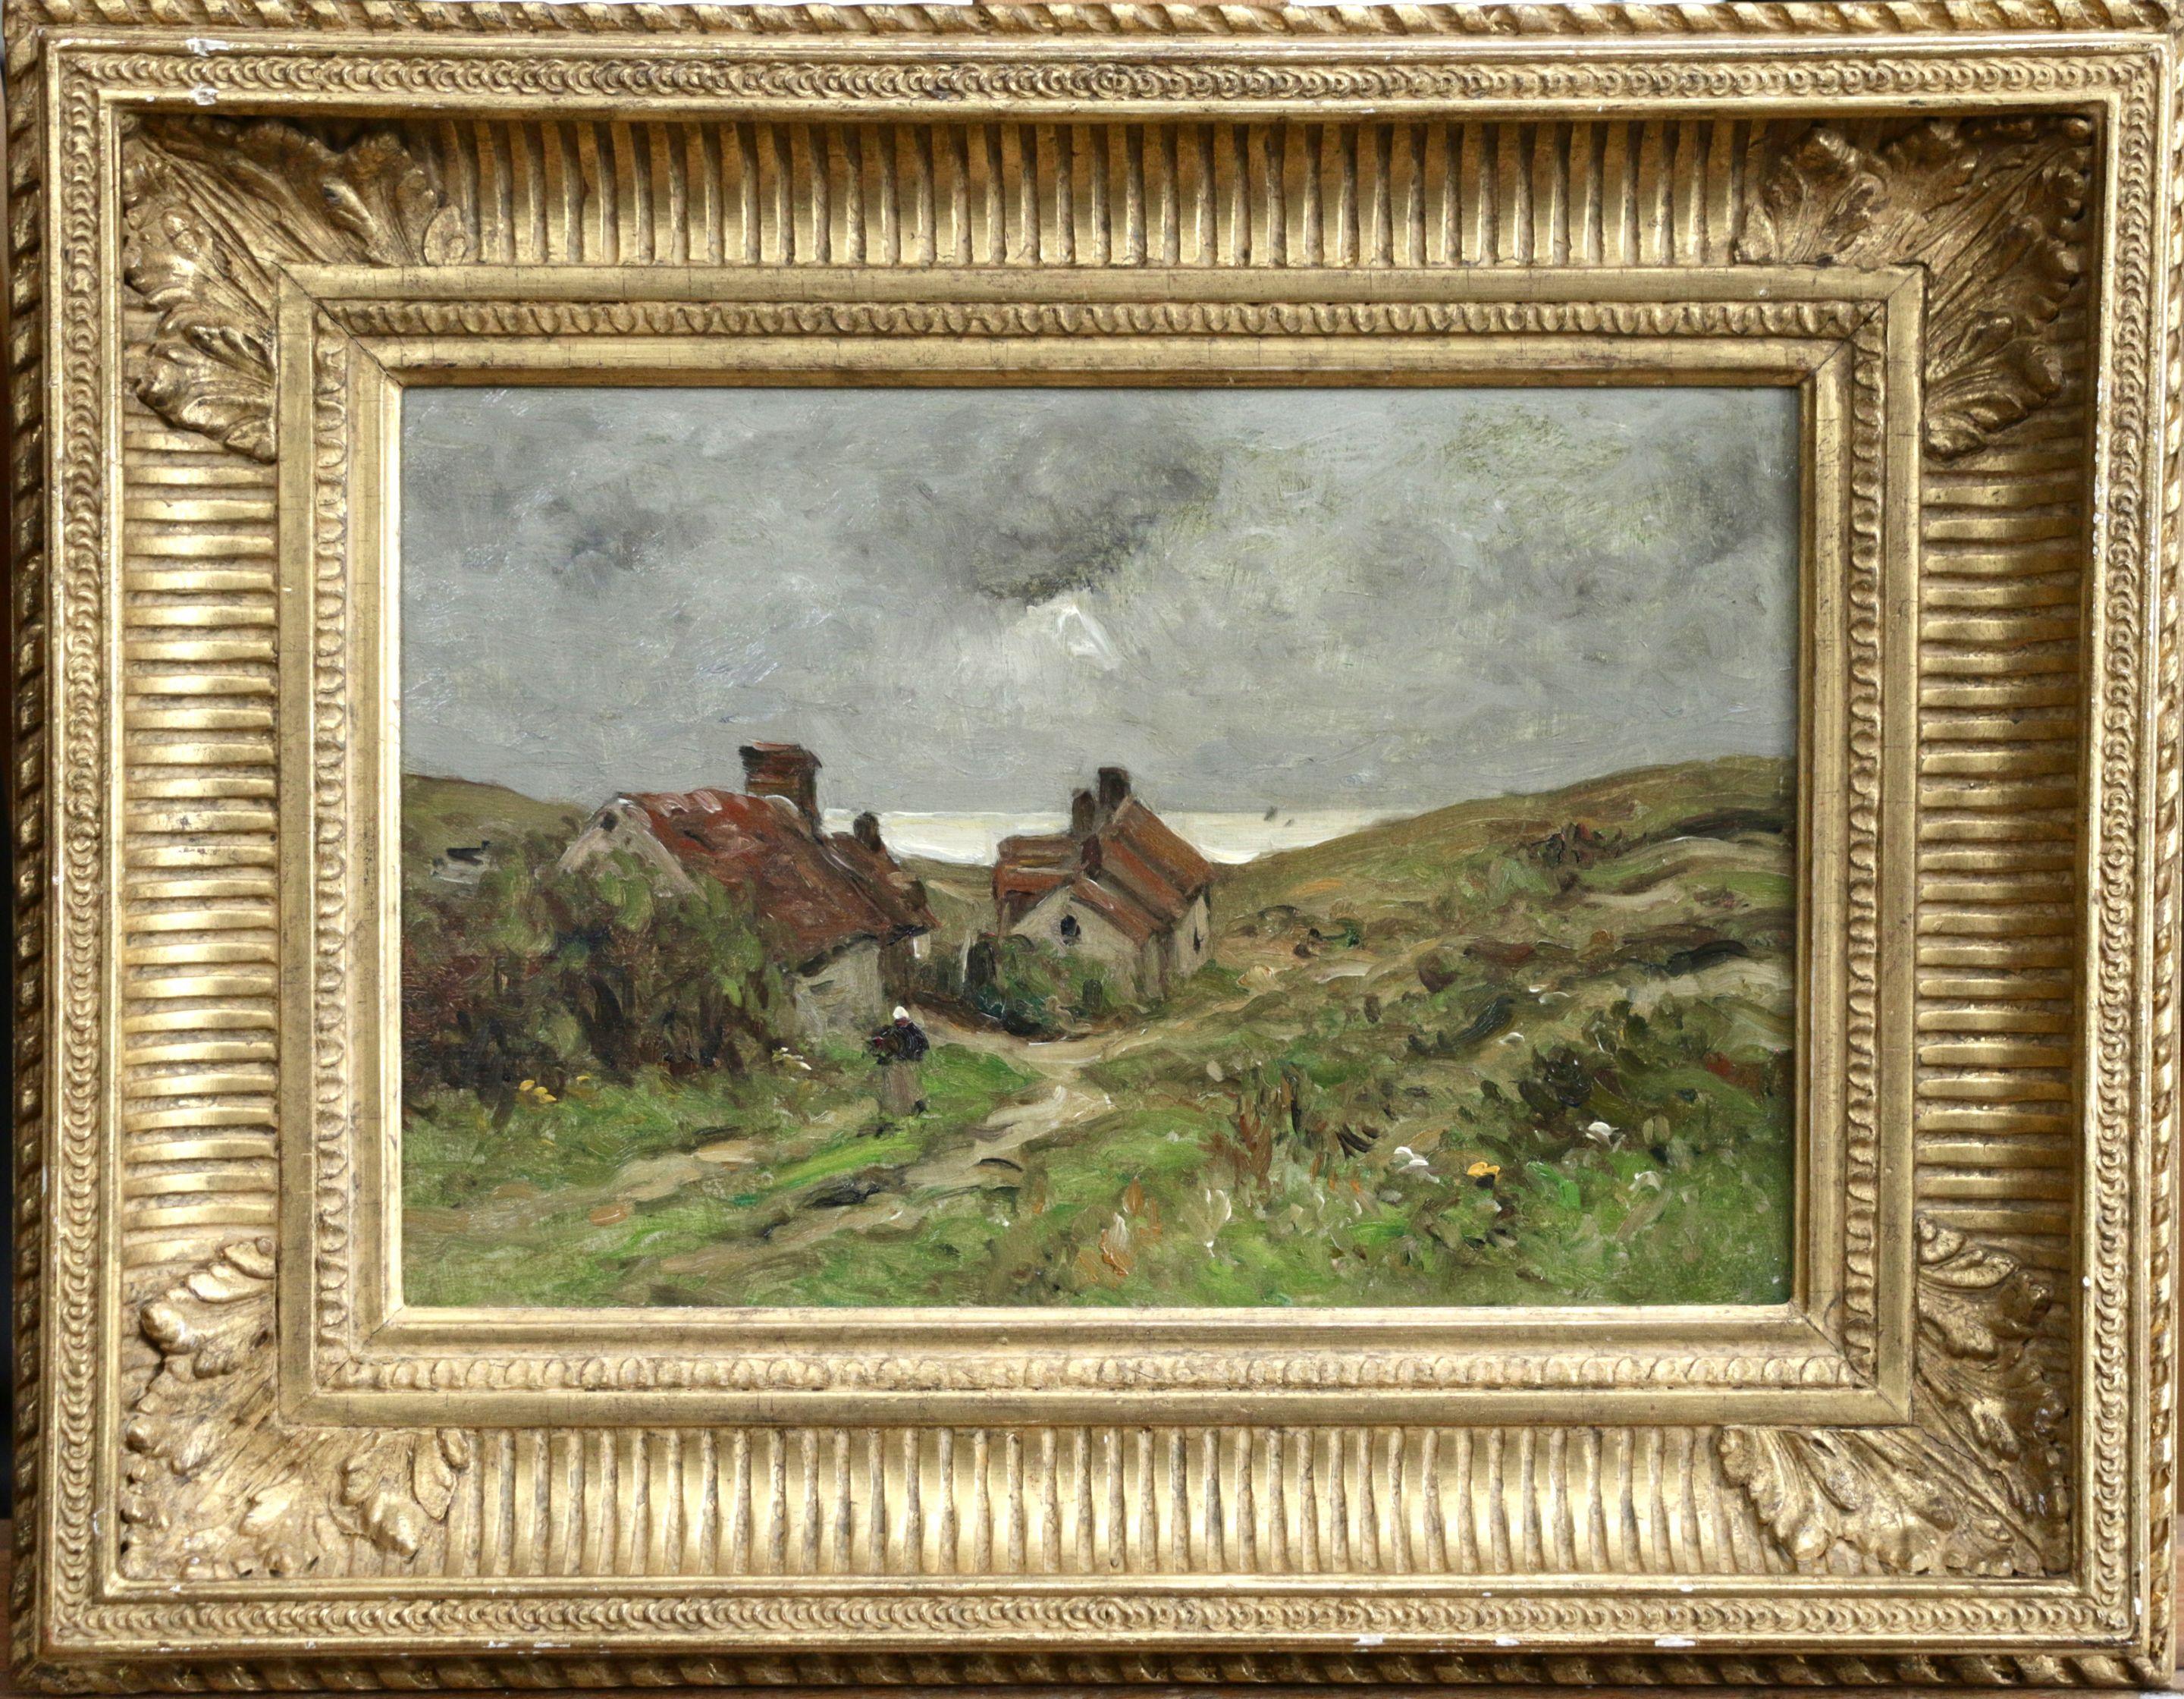 Cottages by the Sea -19th Century Oil, Figure & Houses in Landscape by Guillemet - Painting by Jean-Baptiste-Antoine Guillemet